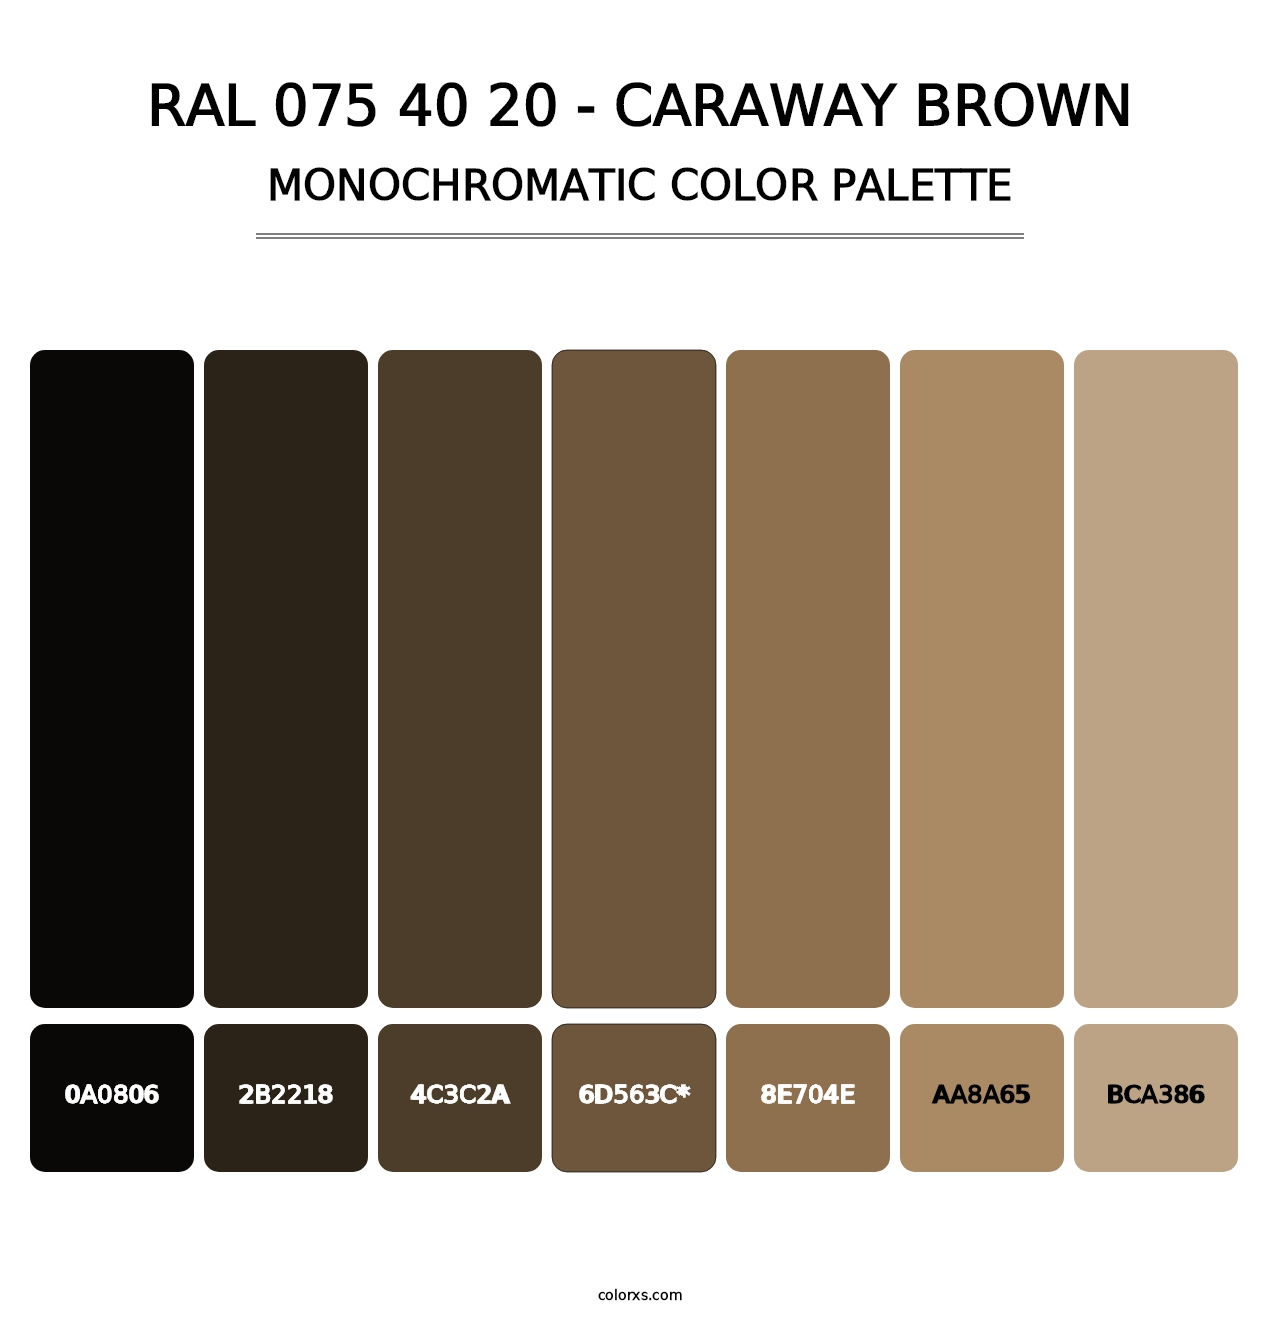 RAL 075 40 20 - Caraway Brown - Monochromatic Color Palette